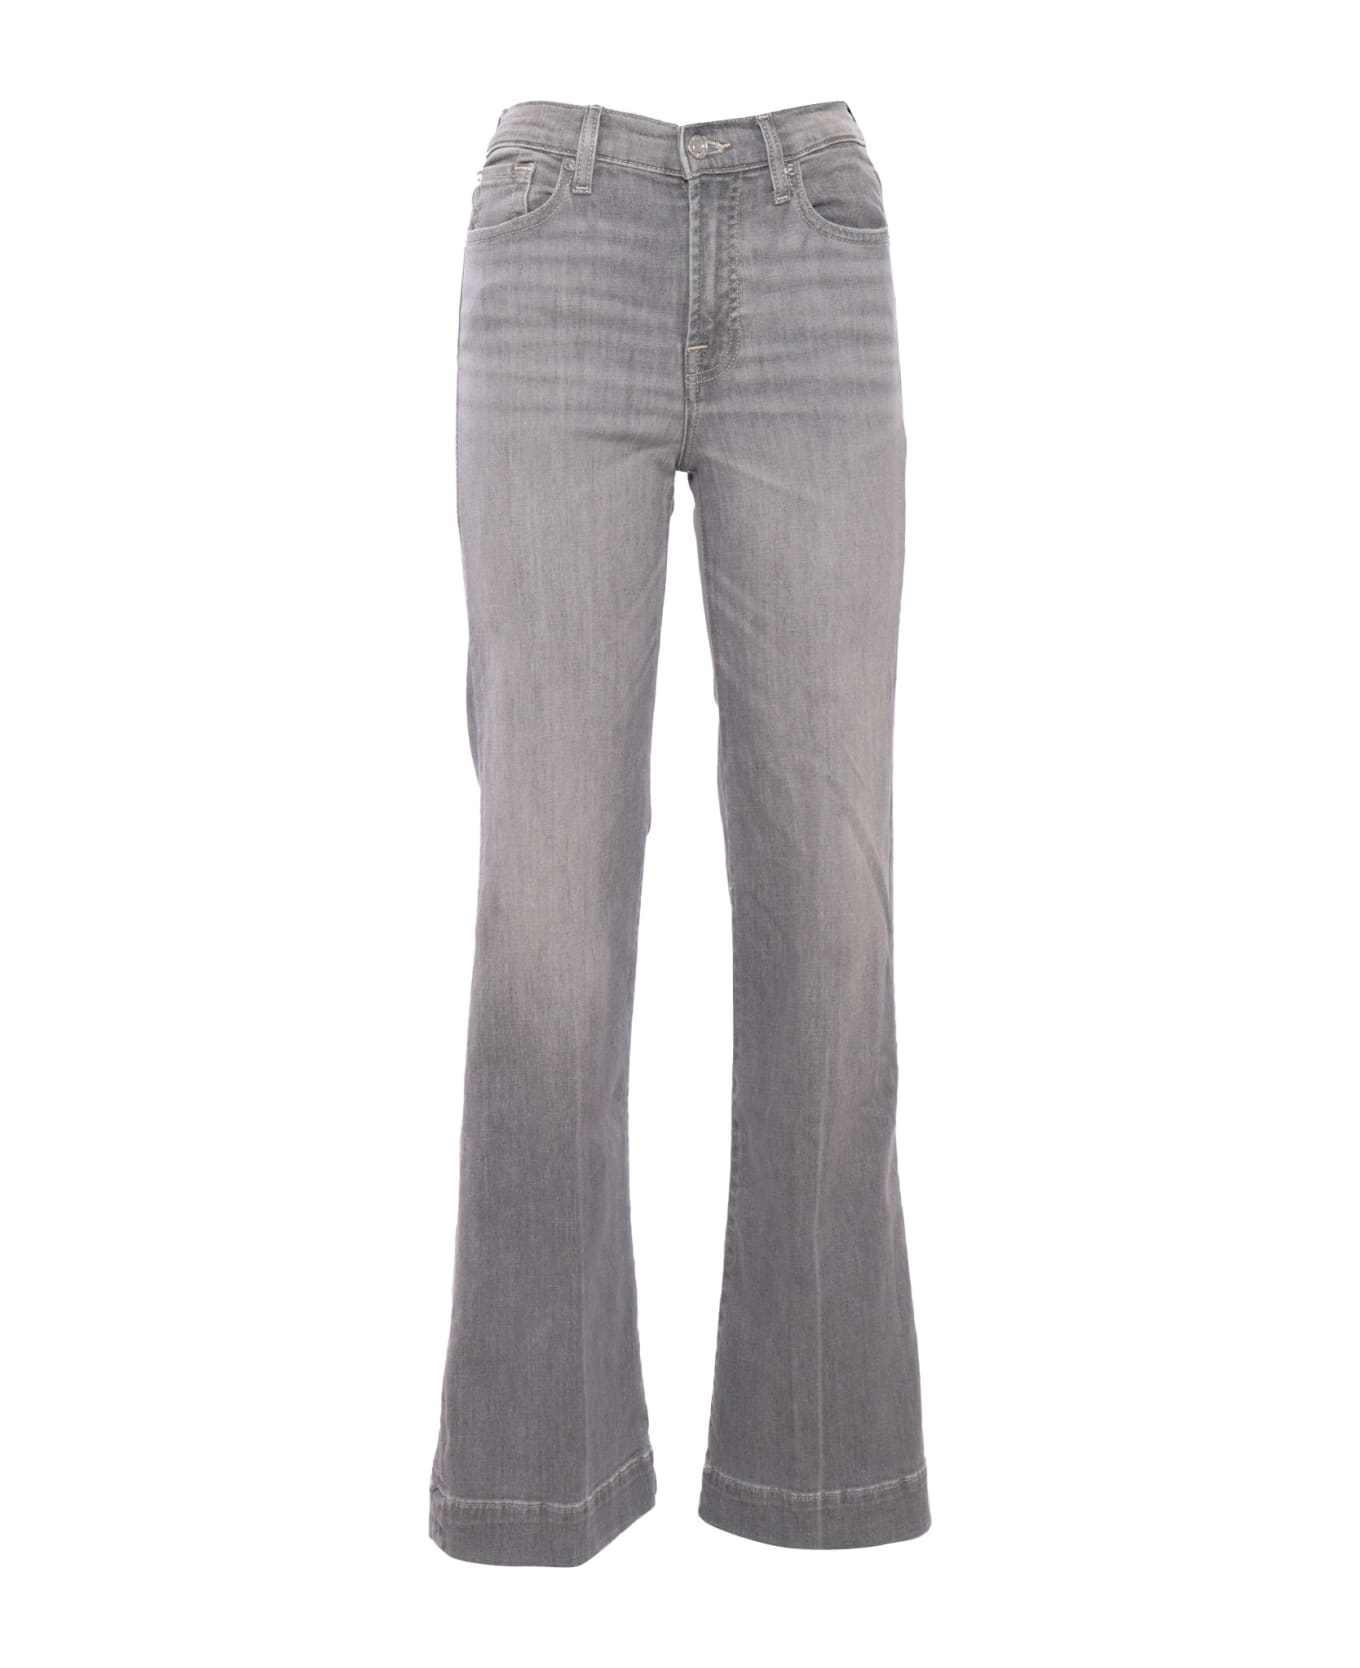 7 For All Mankind Women's Flared Jeans - GREY